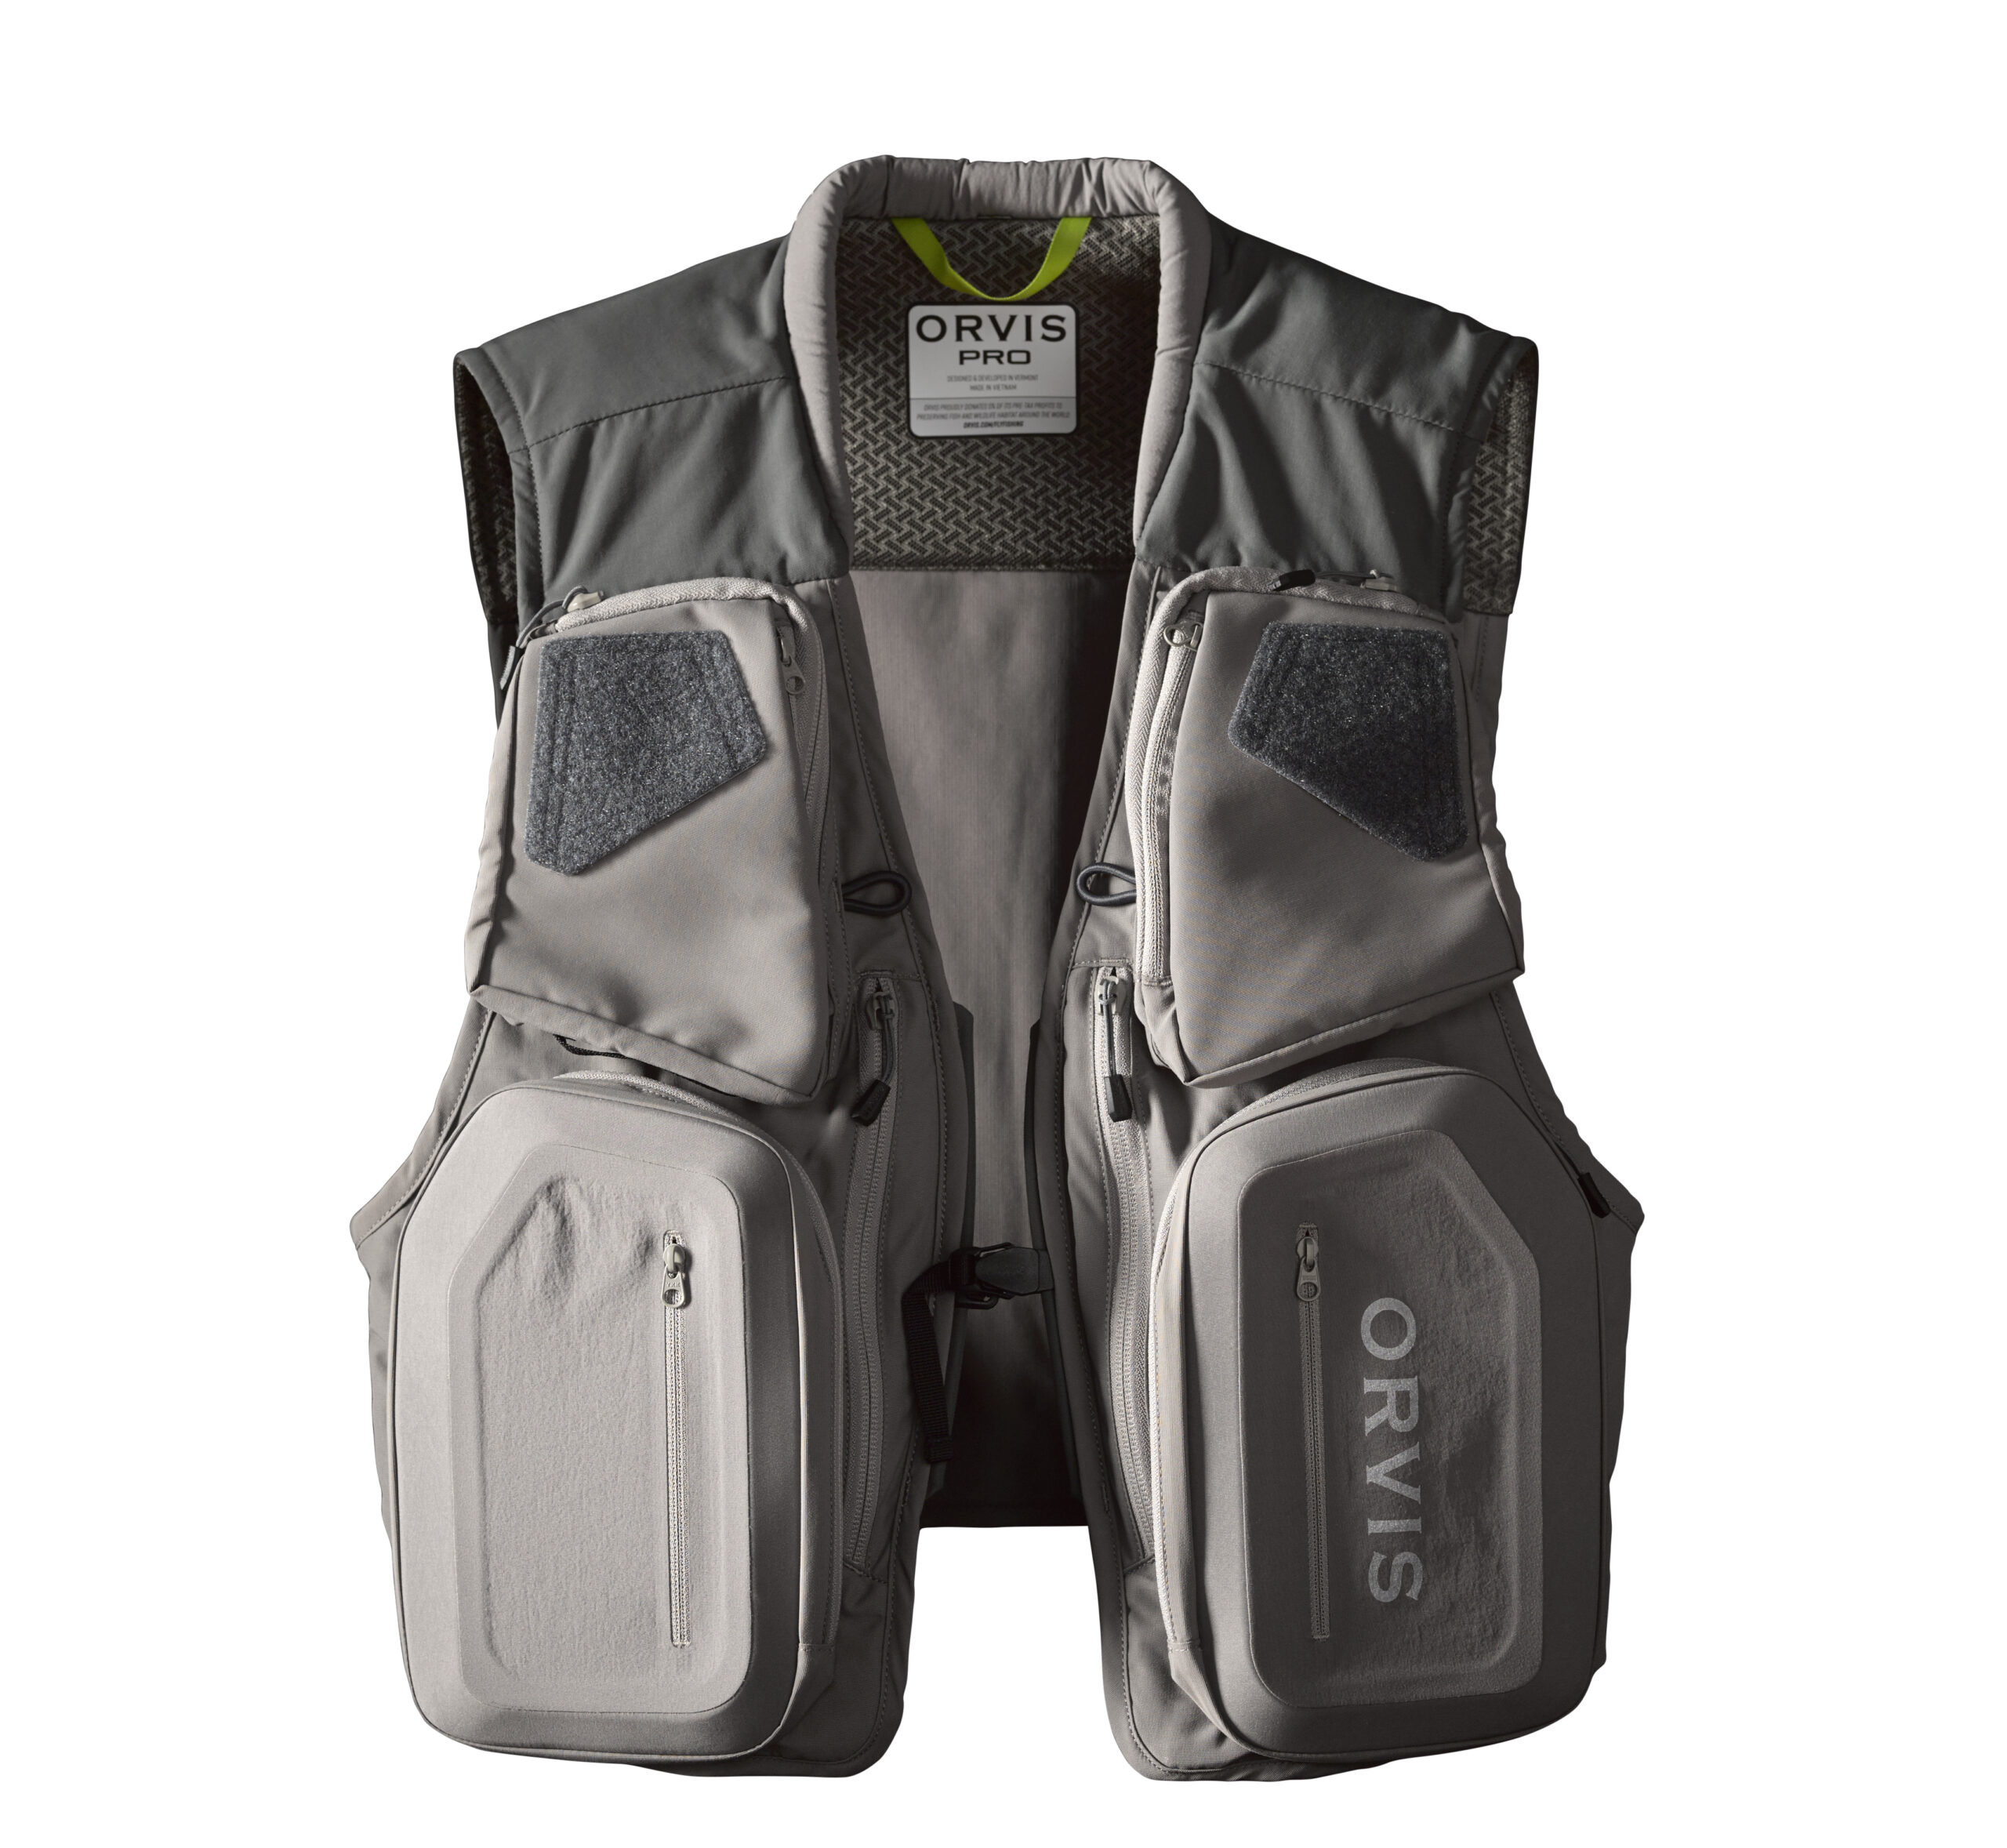 Pro Vest - Orvis Northwest Outfitters